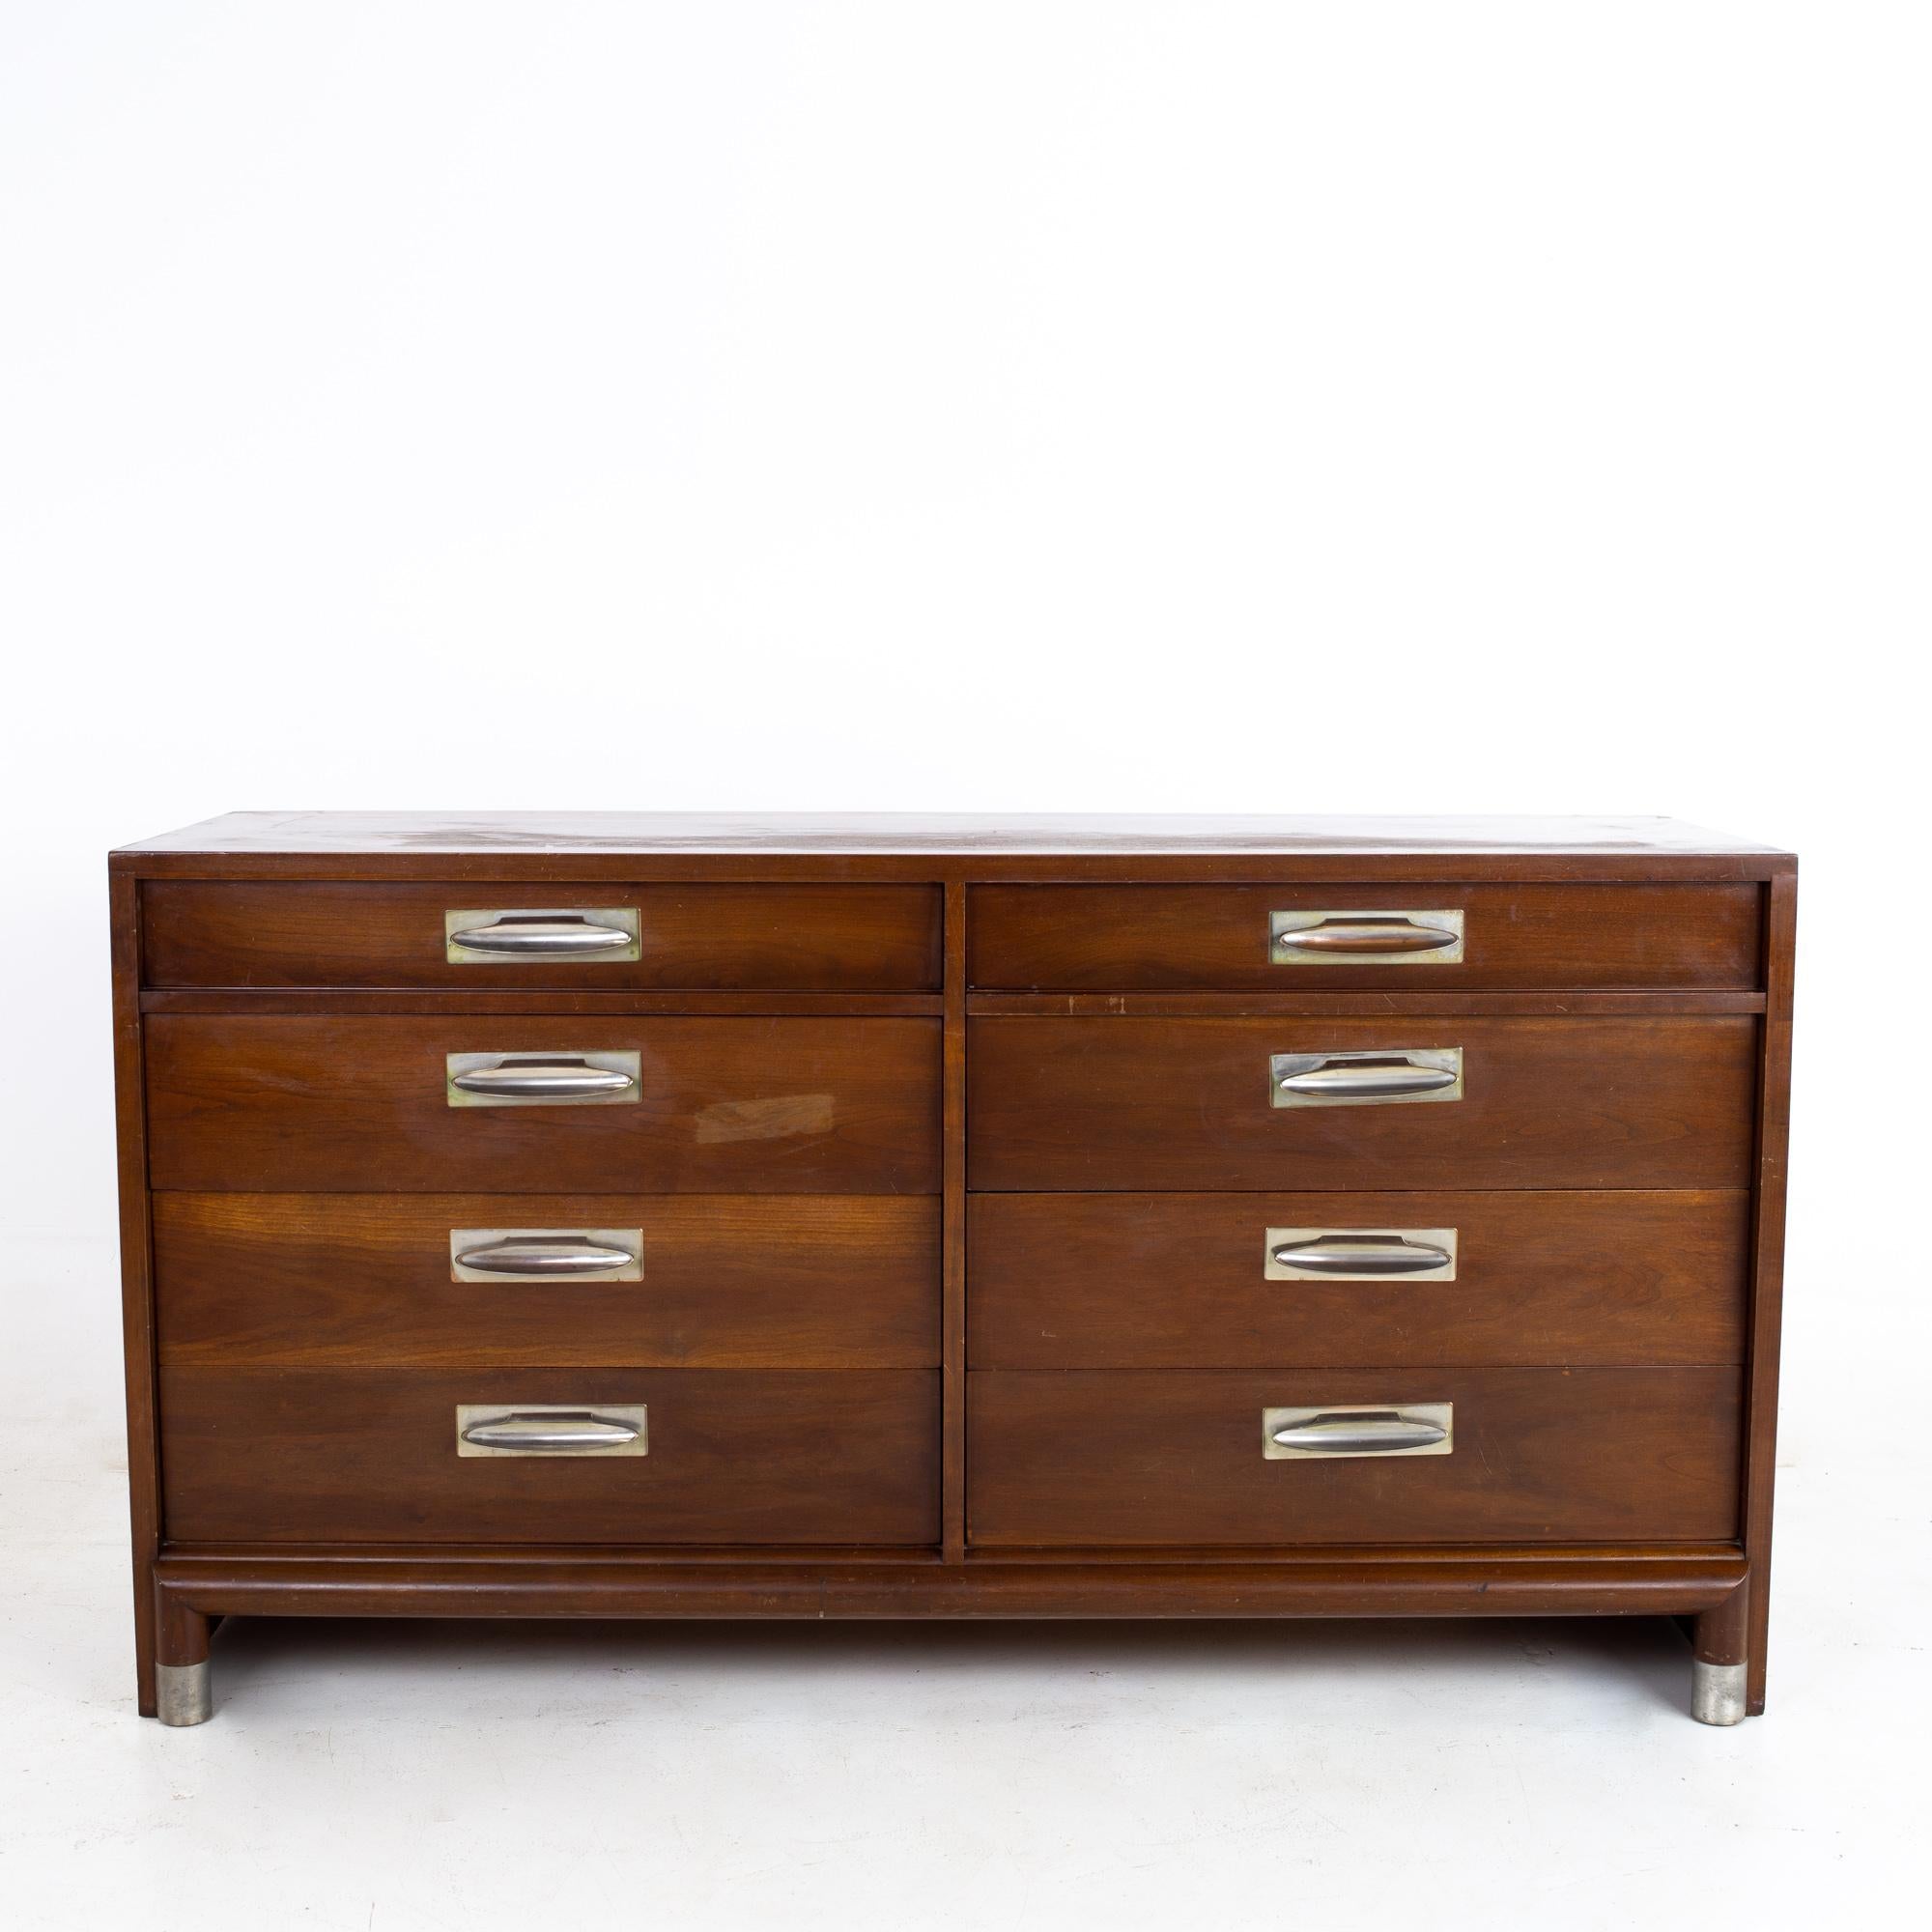 Willett Furniture mid century walnut 8 drawer lowboy dresser

This dresser measures: 60 wide x 20.5 deep x 32 inches high

All pieces of furniture can be had in what we call restored vintage condition. That means the piece is restored upon